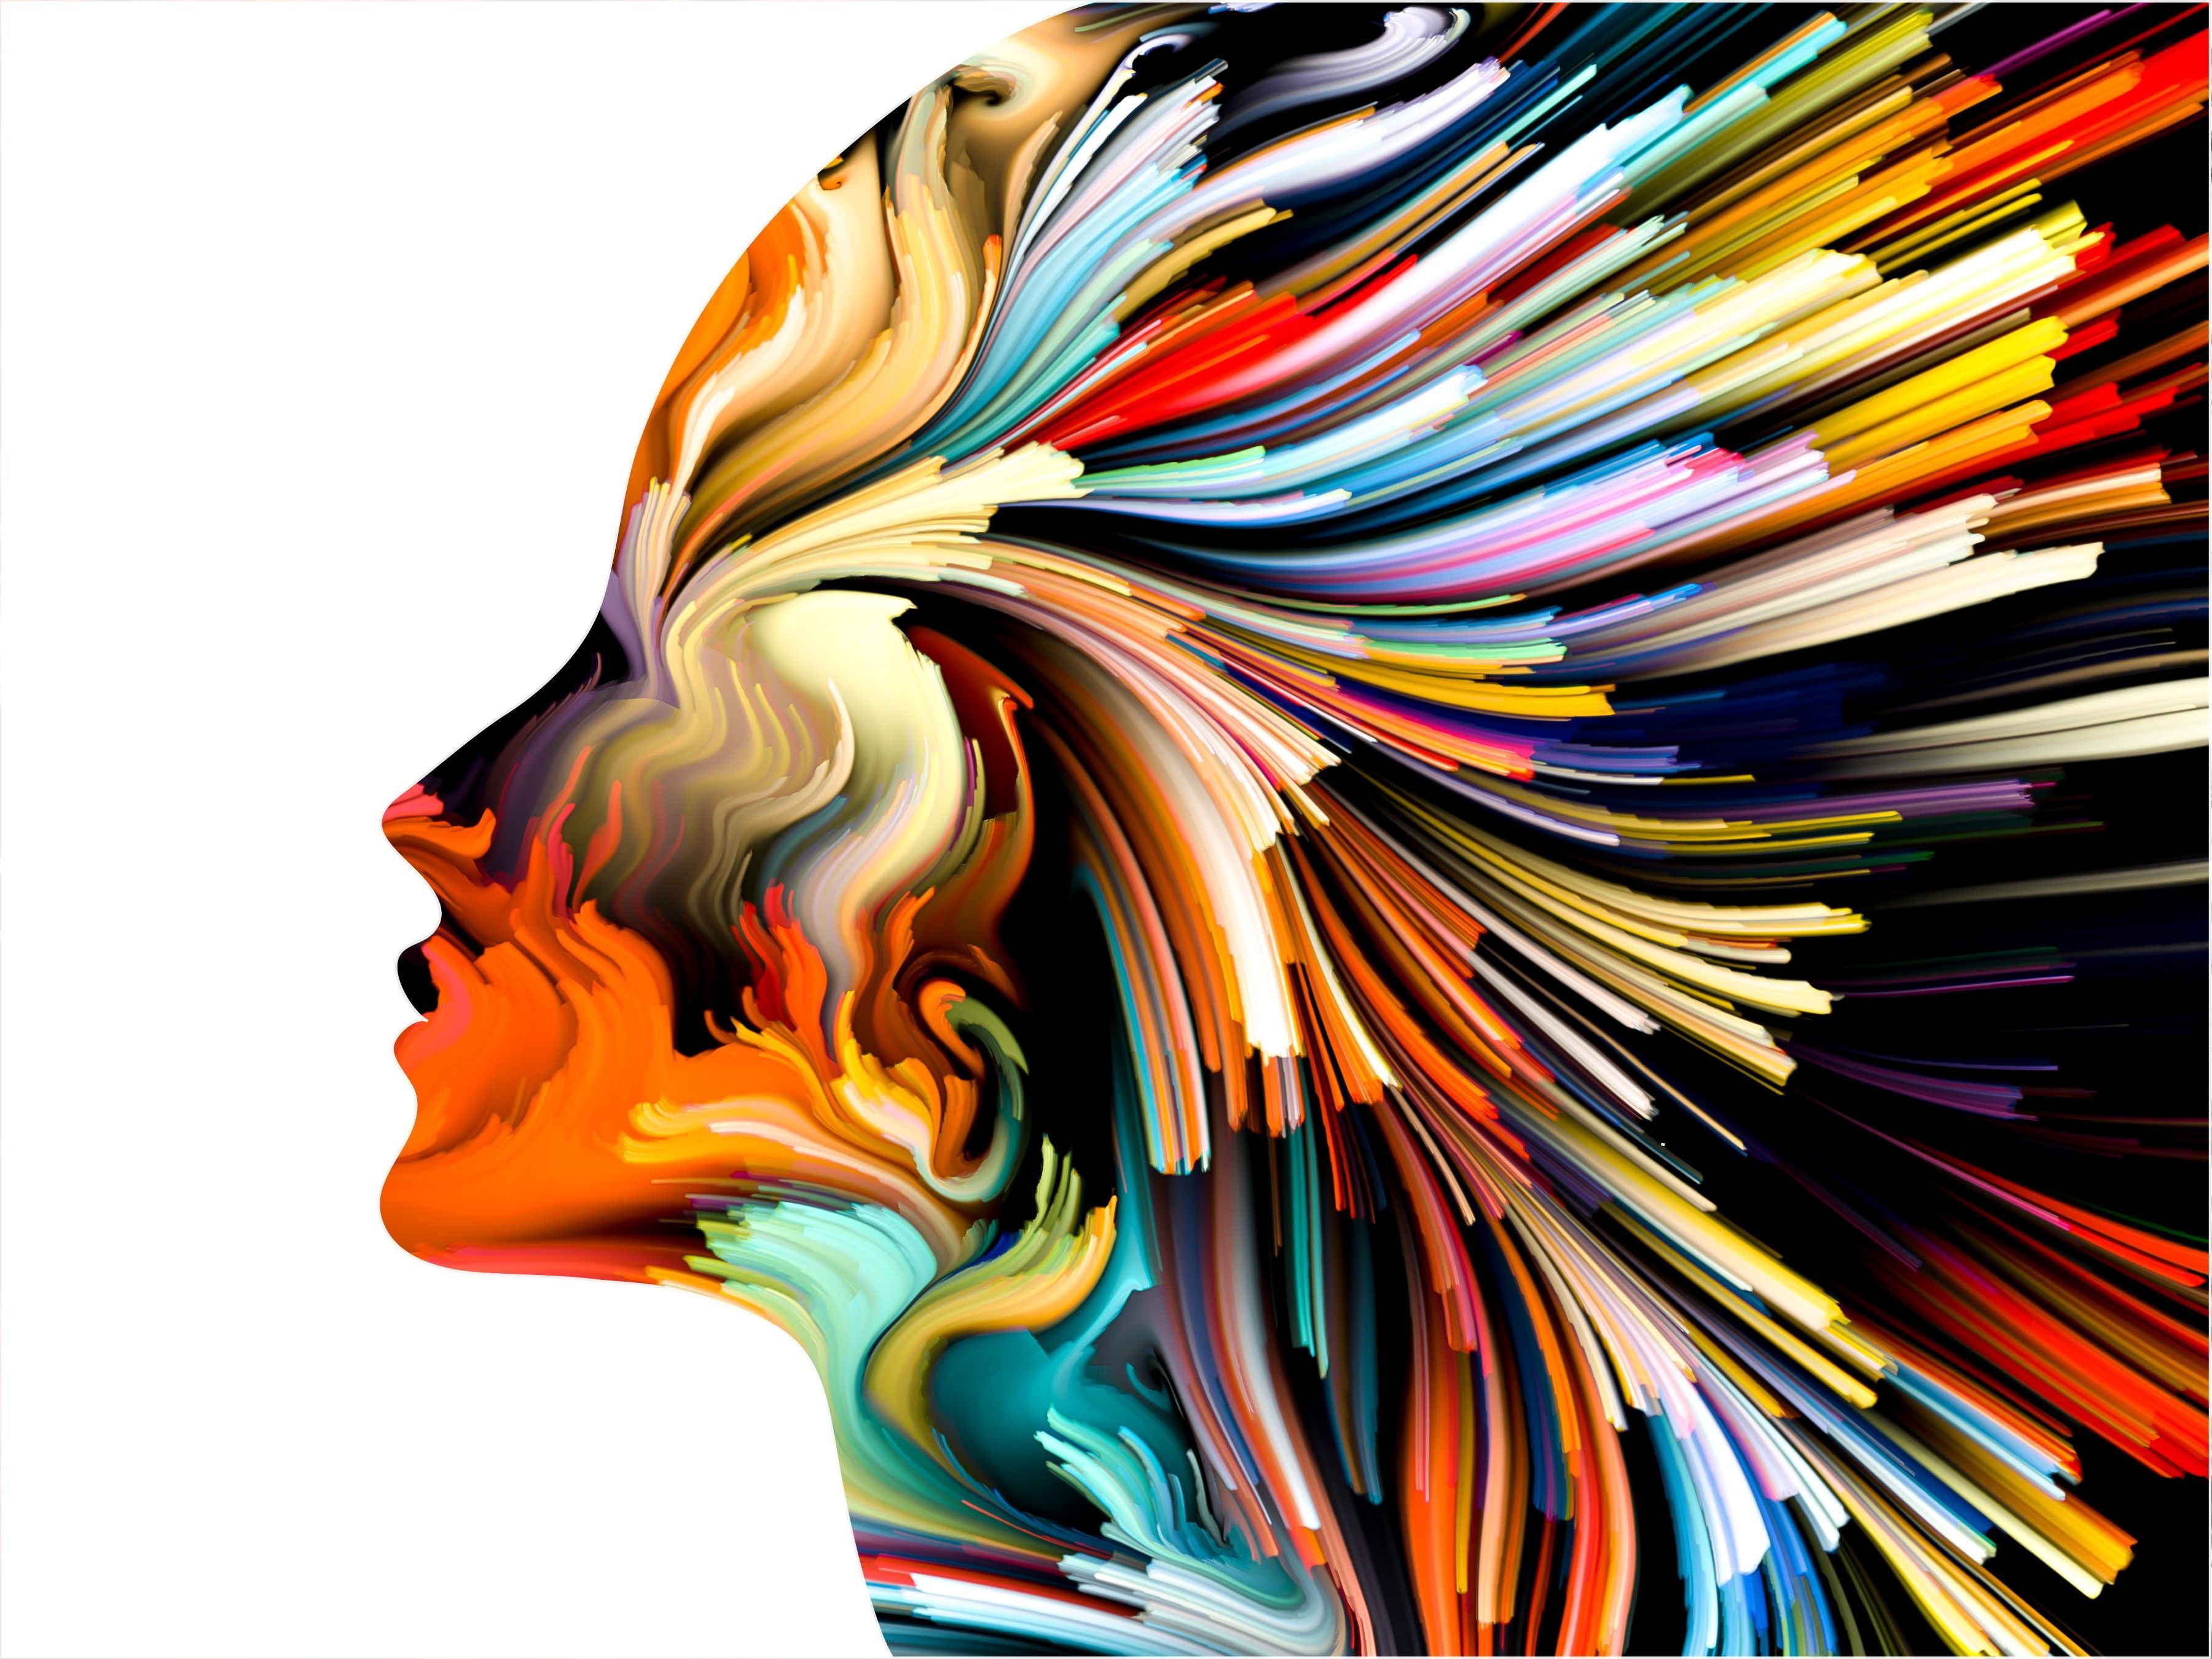 women, Profile, White Background, Abstract, Artwork, Colorful Wallpaper. Abstract, Abstract poster, Girl face painting